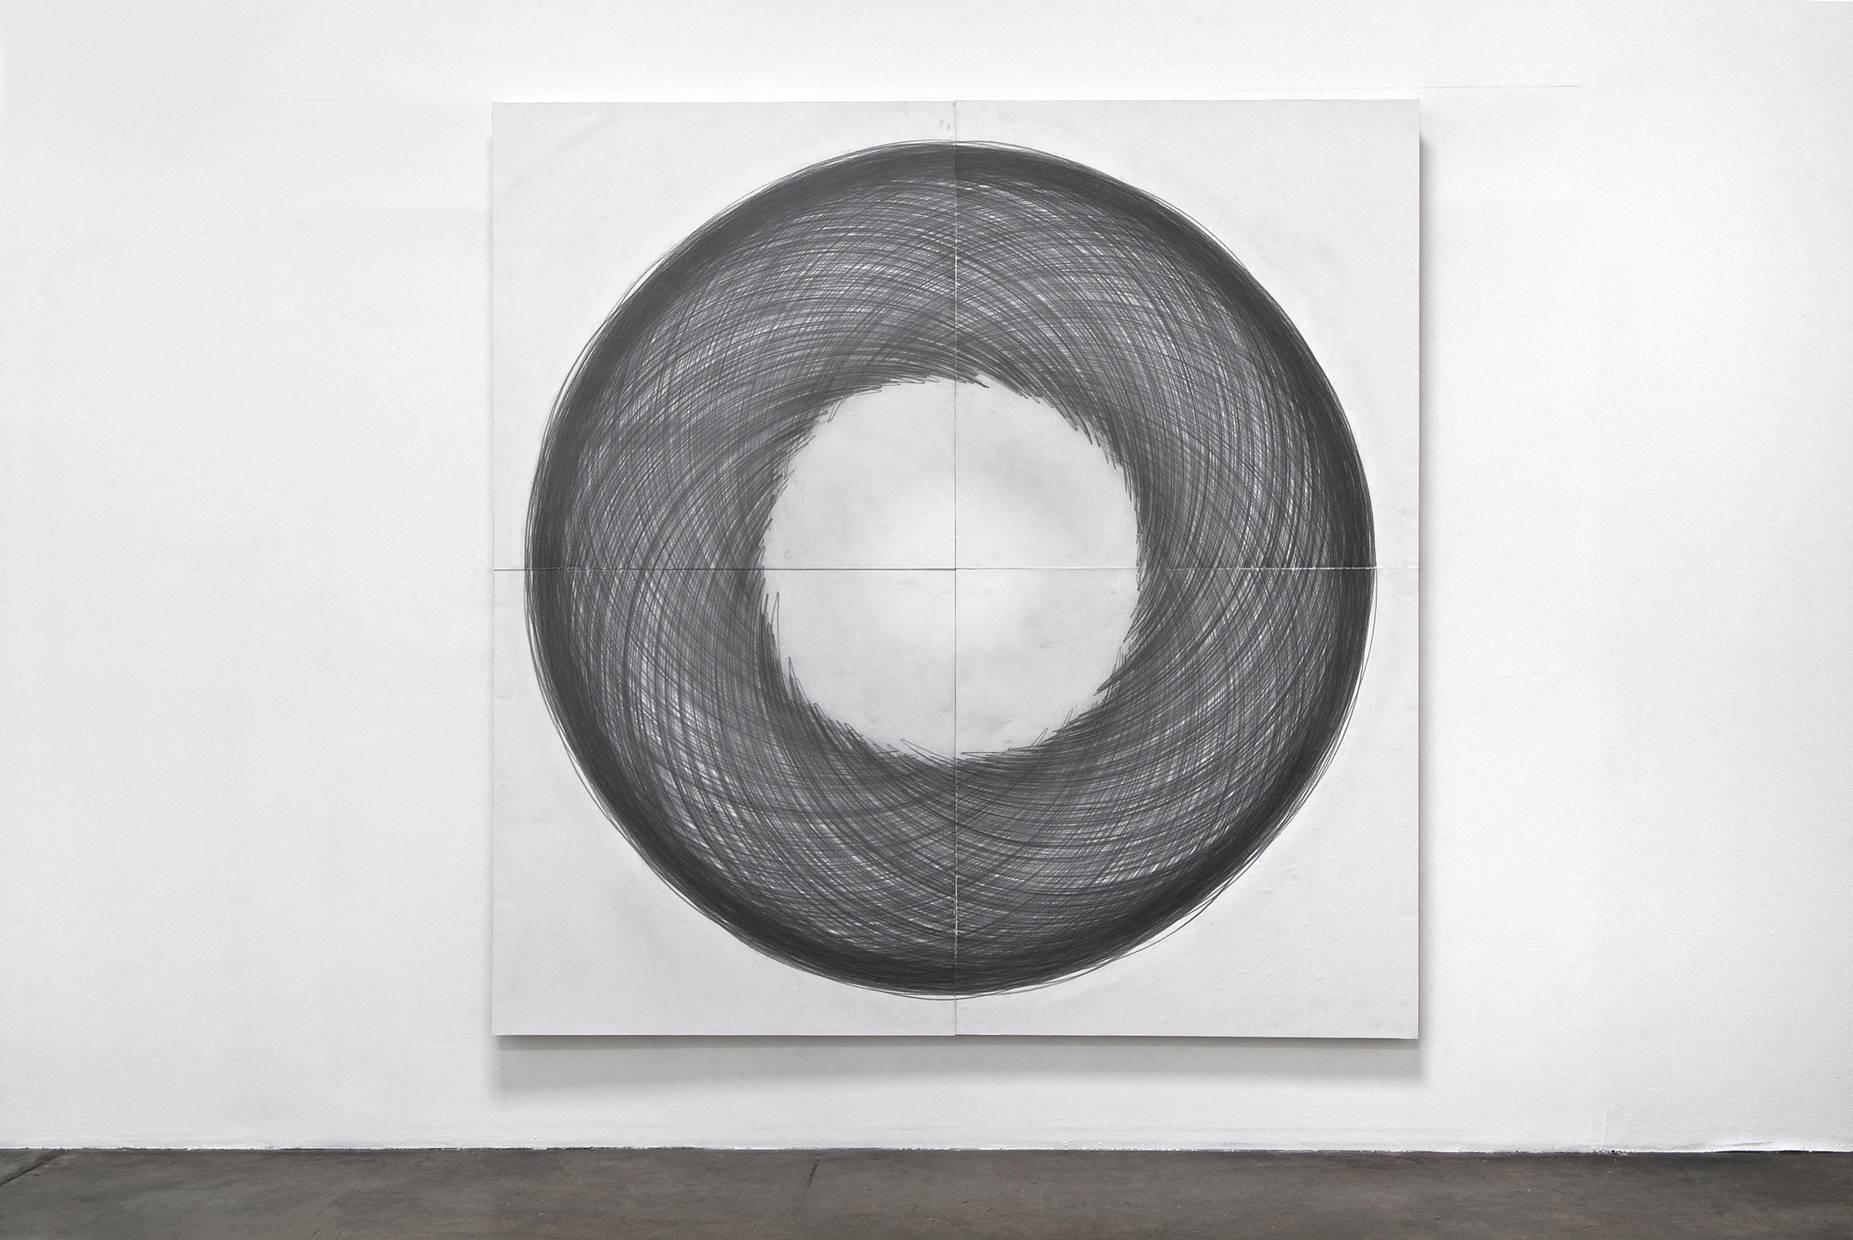 Original body-drawn artwork by artist, Tony Orrico from his Penwald series (ed. 1/8, each unique, derived from live performance). Signed by the artist, all acid-free/archival materials, paper mounted on aluminum and wood framed. Four 49